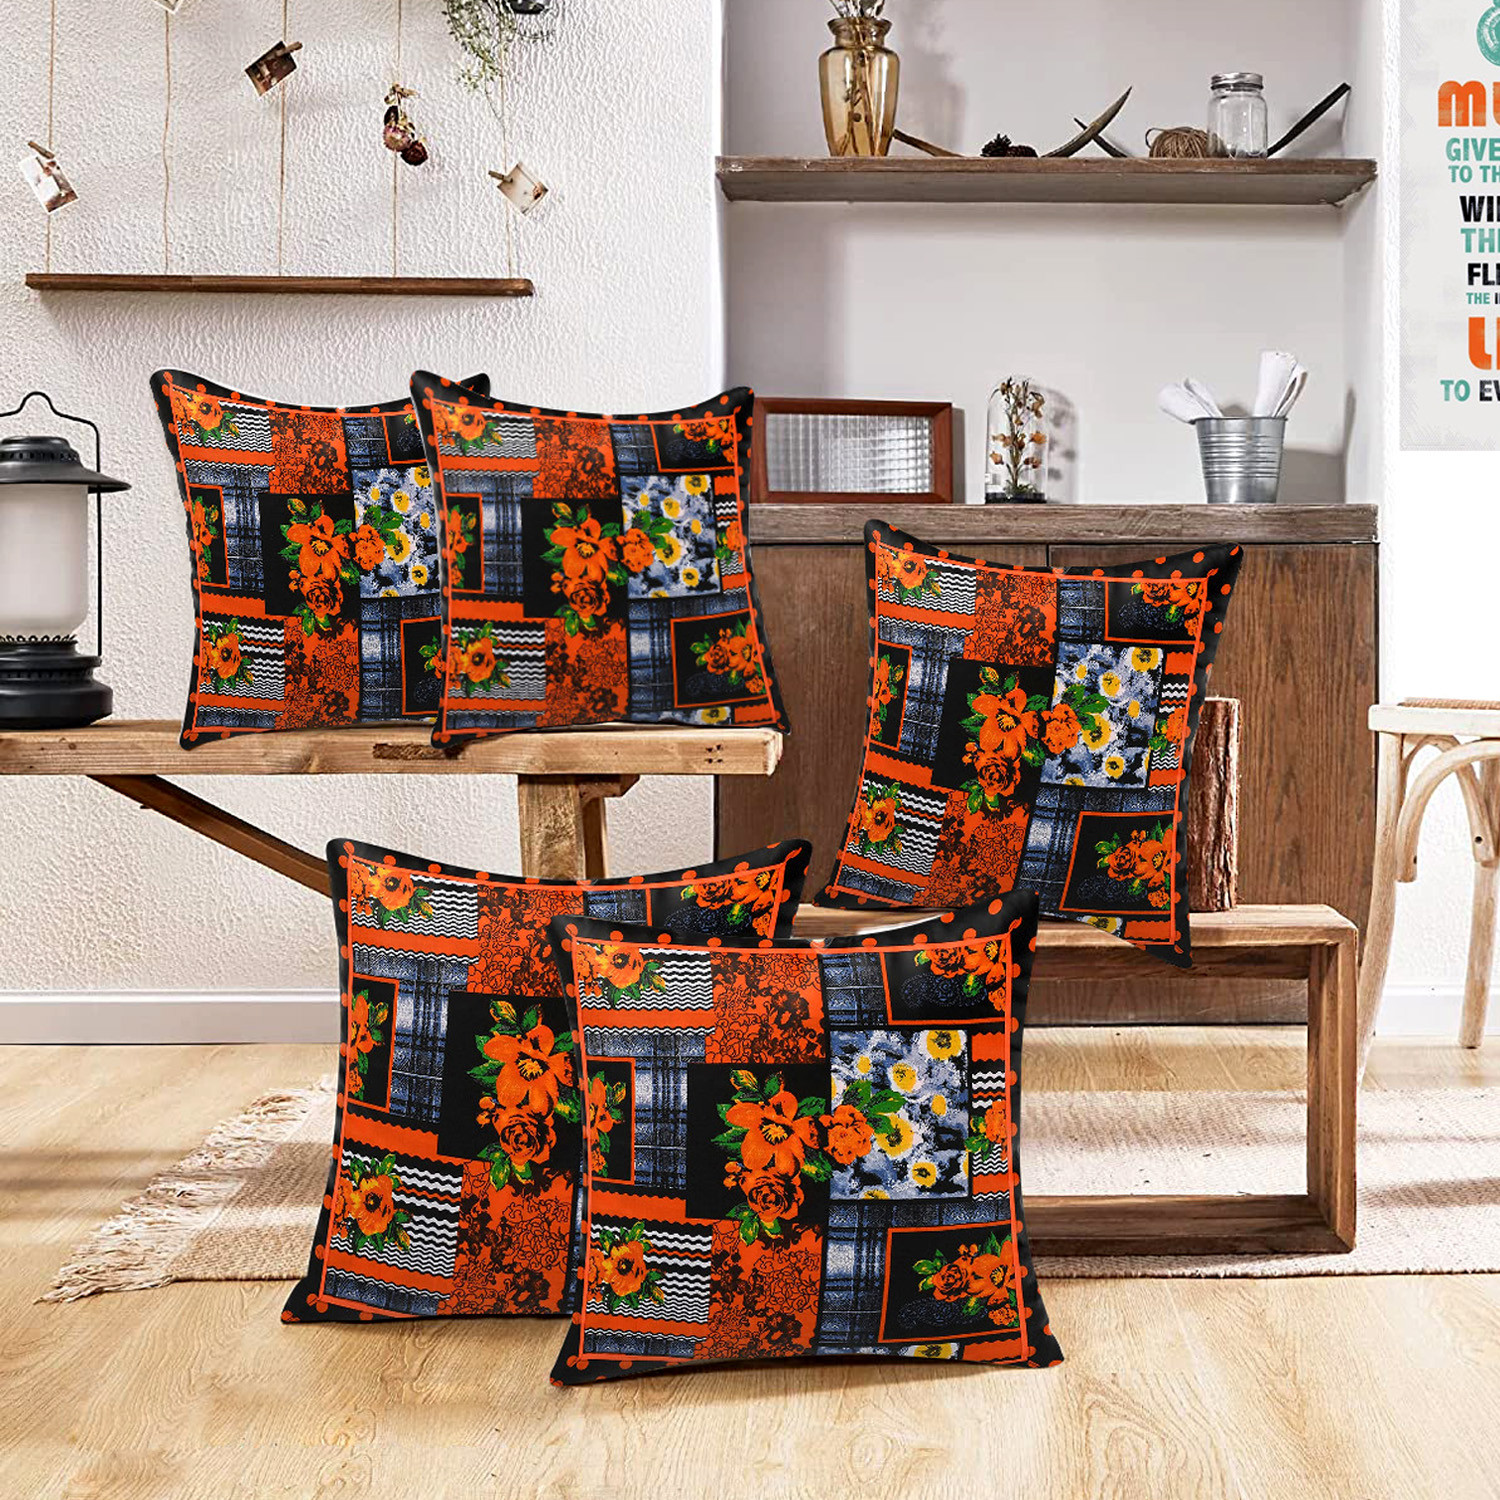 Kuber Industries Cushion Cover|Ractangle Cushion Covers|Sofa Cushion Covers|Cushion Covers 16 inch x 16 inch|Cushion Cover Set of 5 (Orange)